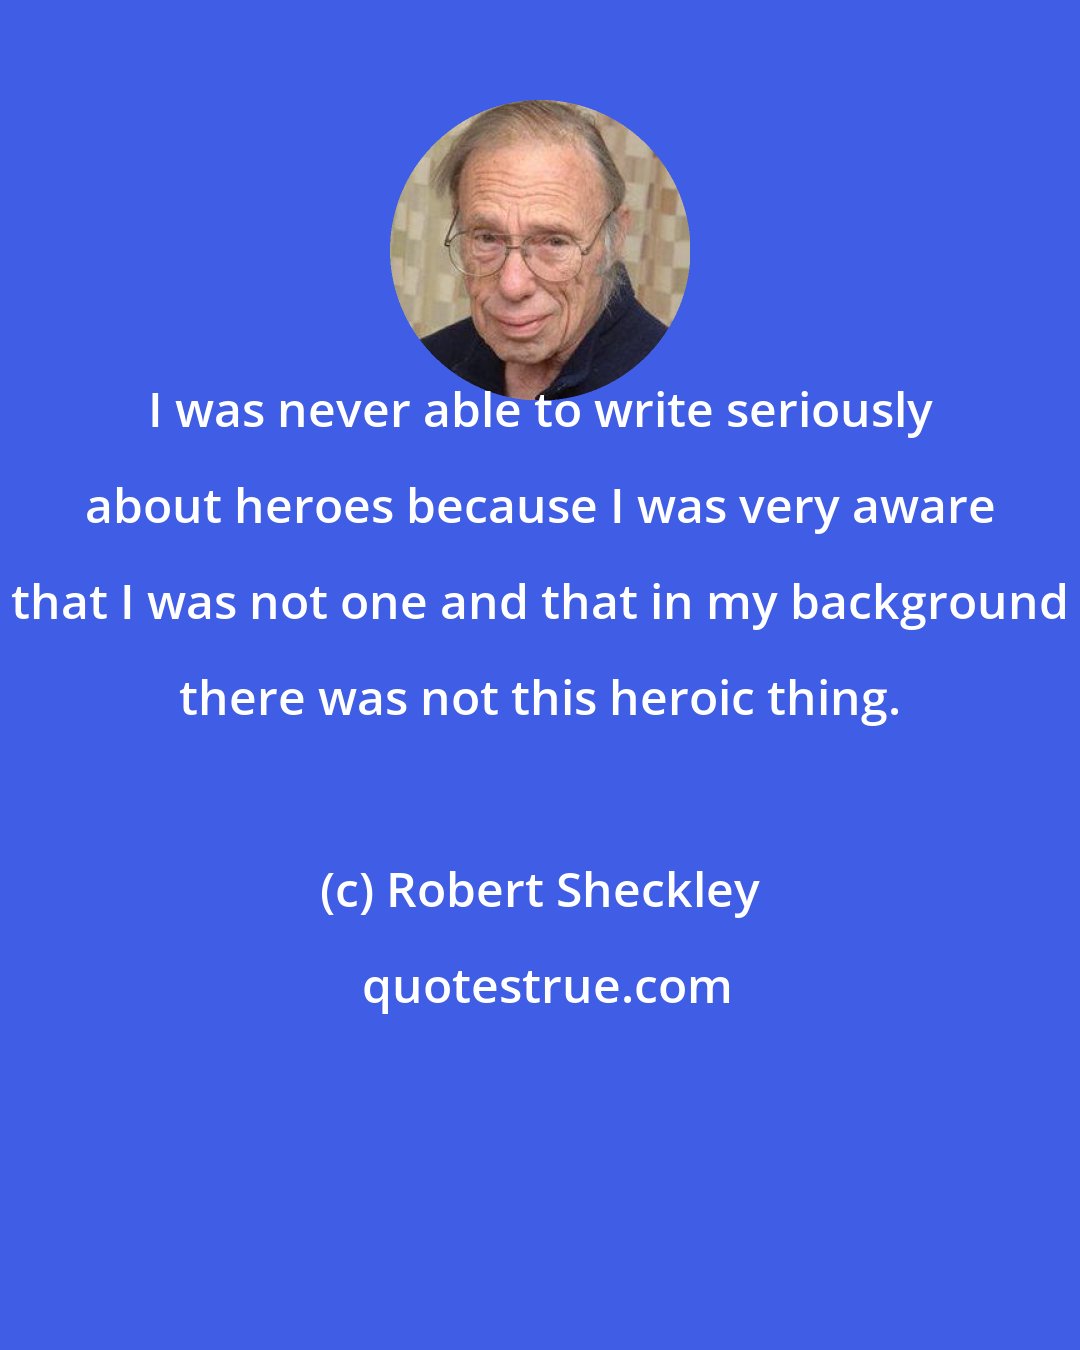 Robert Sheckley: I was never able to write seriously about heroes because I was very aware that I was not one and that in my background there was not this heroic thing.